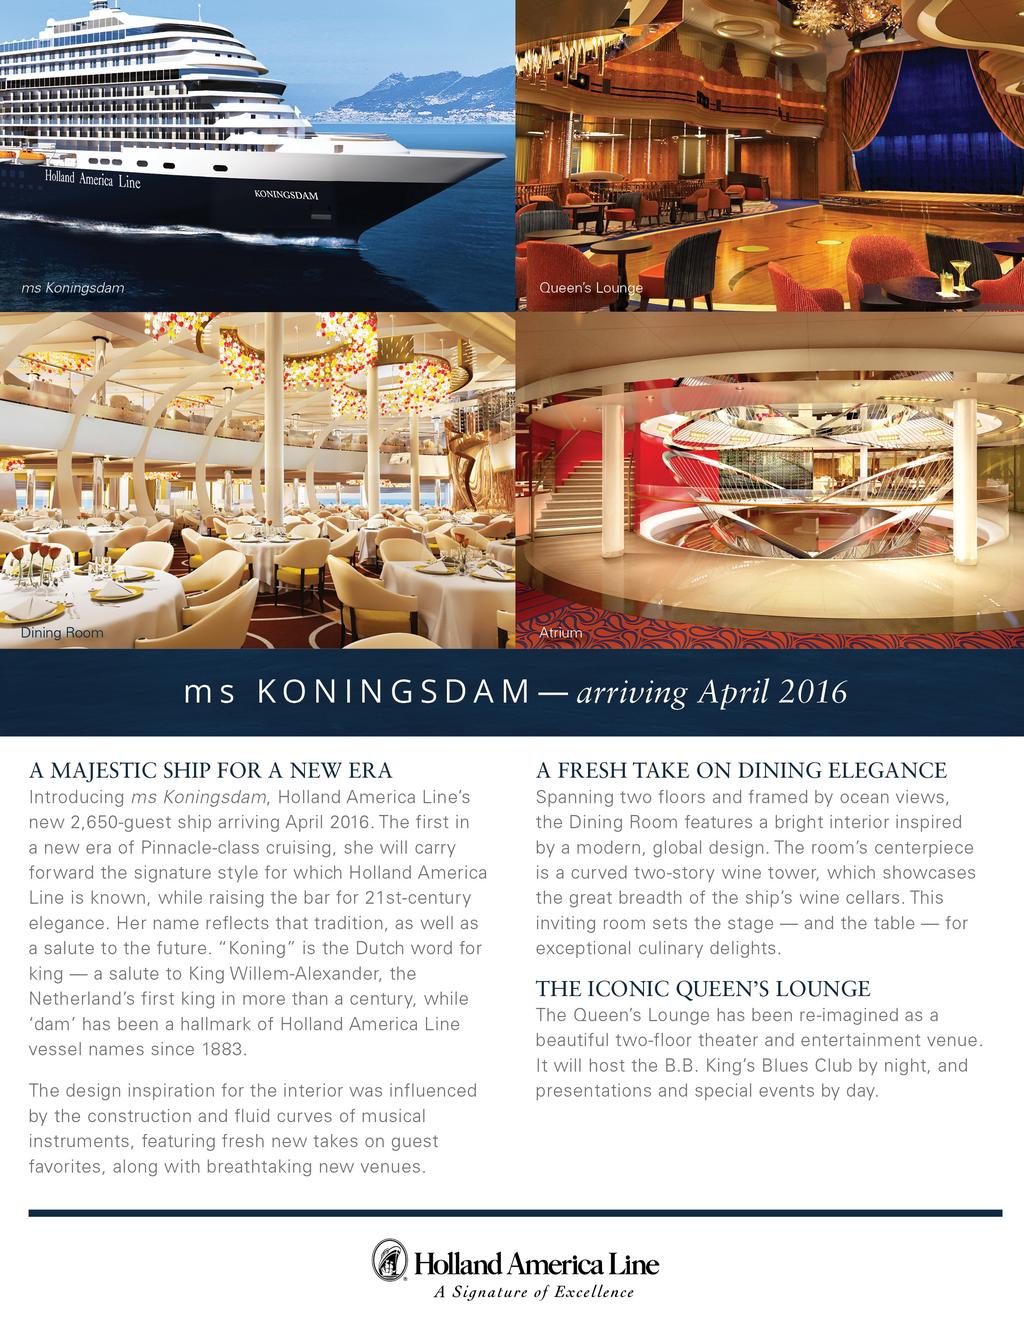 Two GREAT opportunities to sail on the majestic new ms Koningsdam!